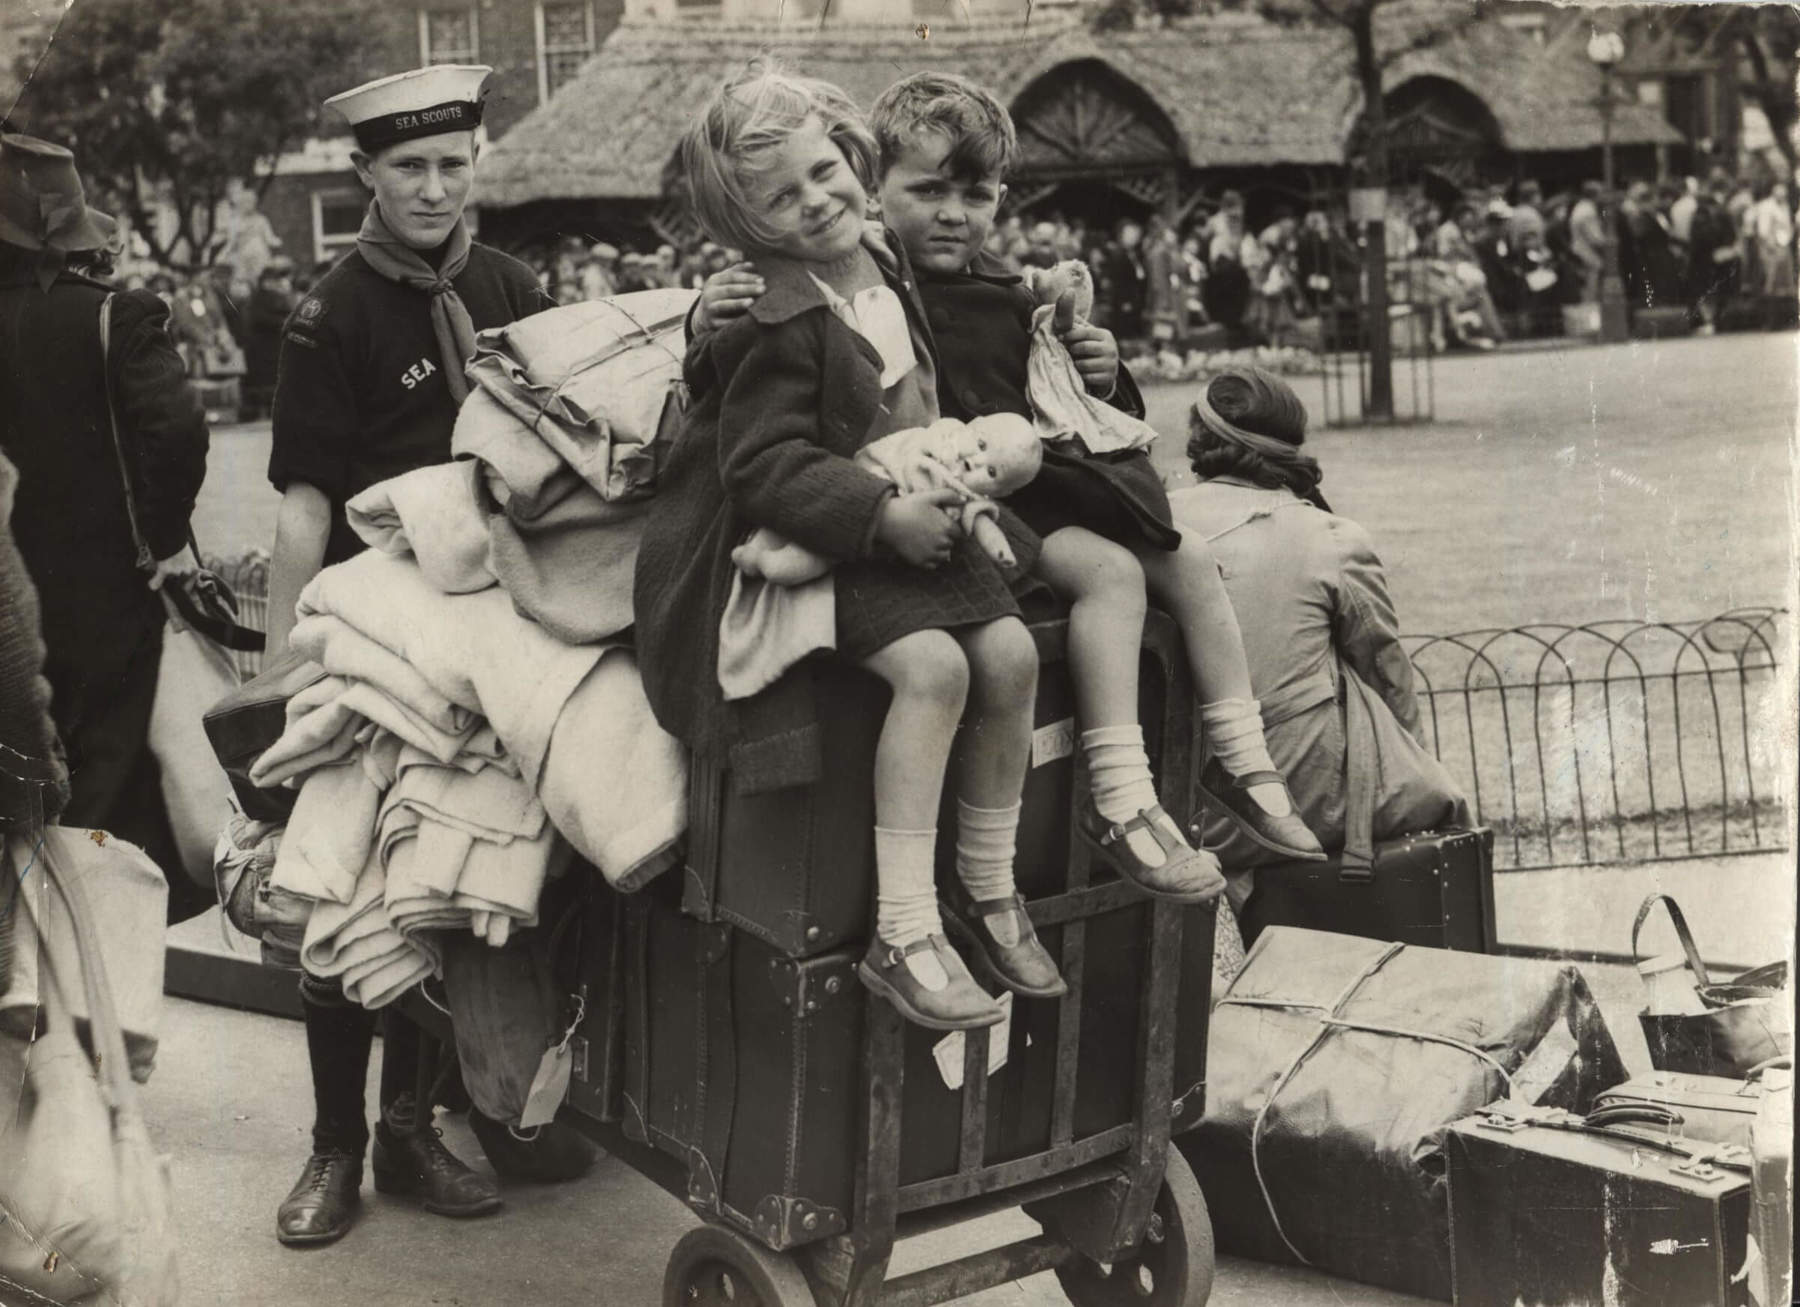 Black and white photo of two young people posing with their arms around each other while sitting on top of a cart pushed by a Scout